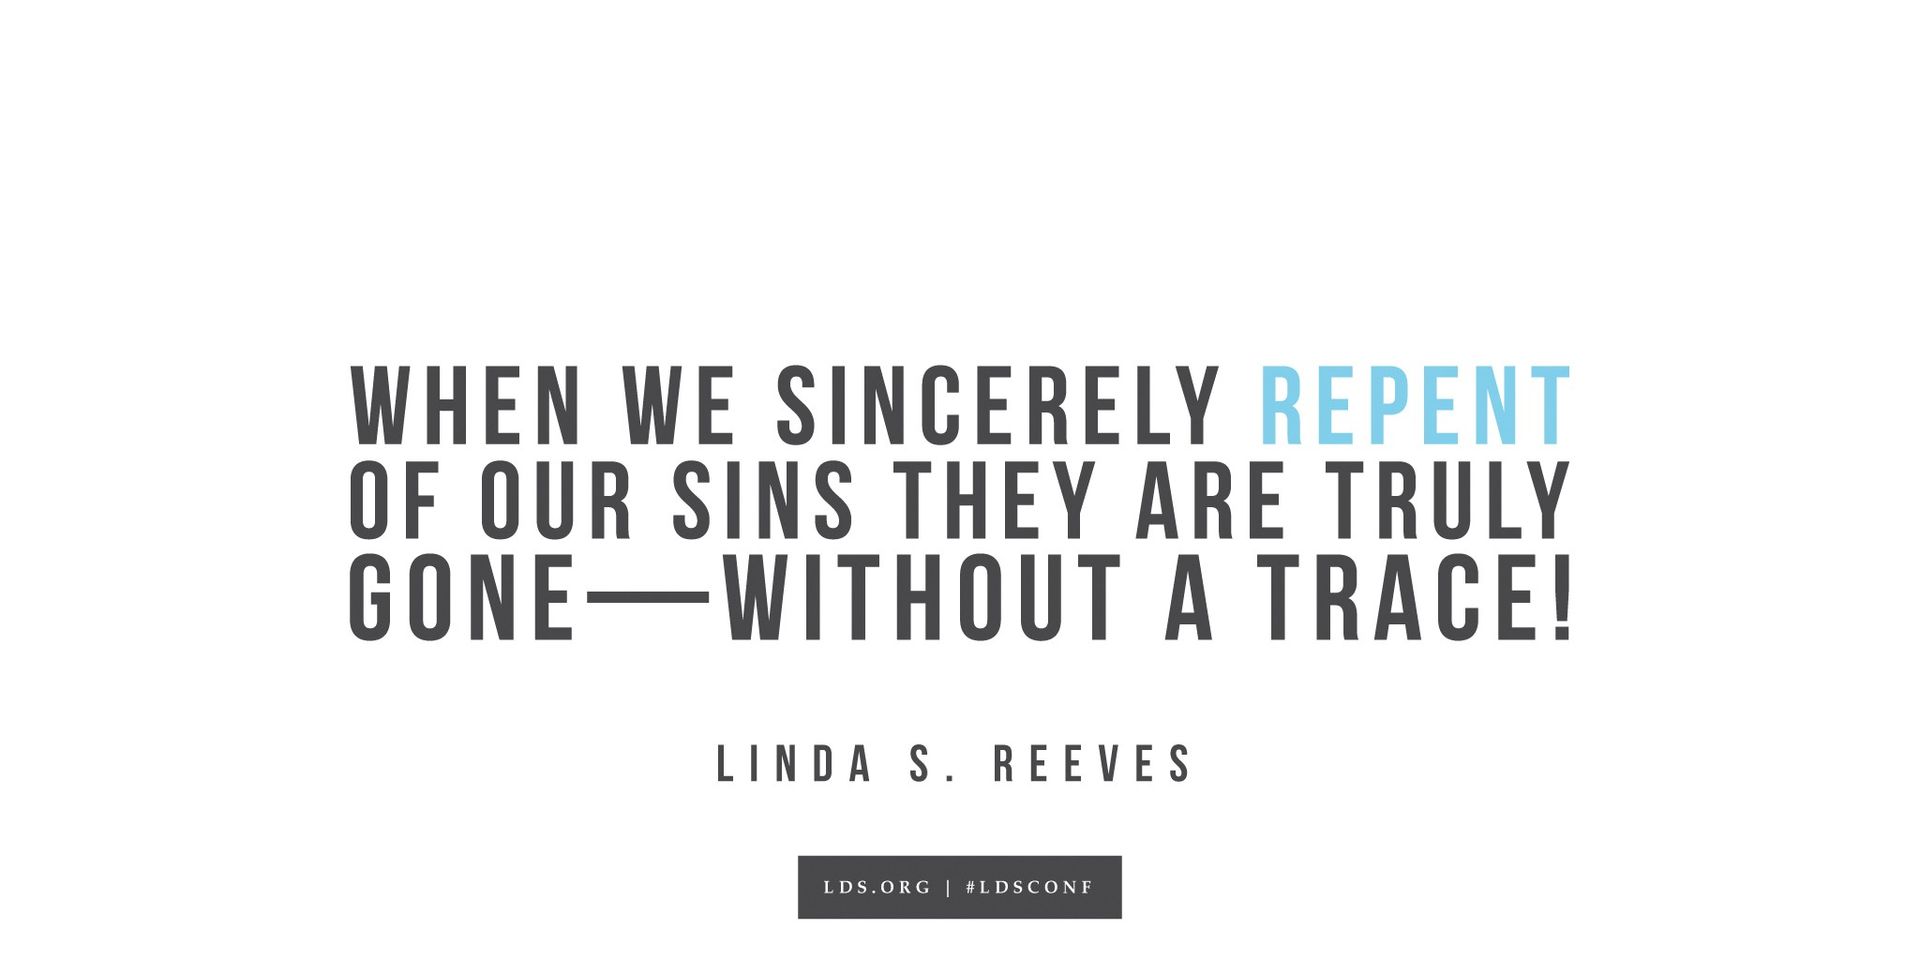 “When we sincerely repent of our sins, they are truly gone—without a trace!”—Linda S. Reeves, “The Great Plan of Redemption”